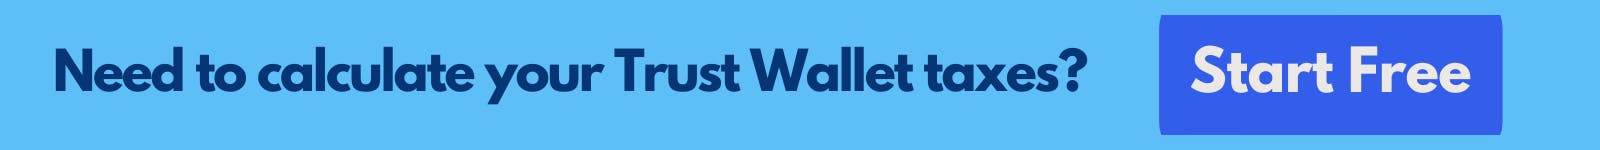 Need to calculate your Trust Wallet taxes? Start free